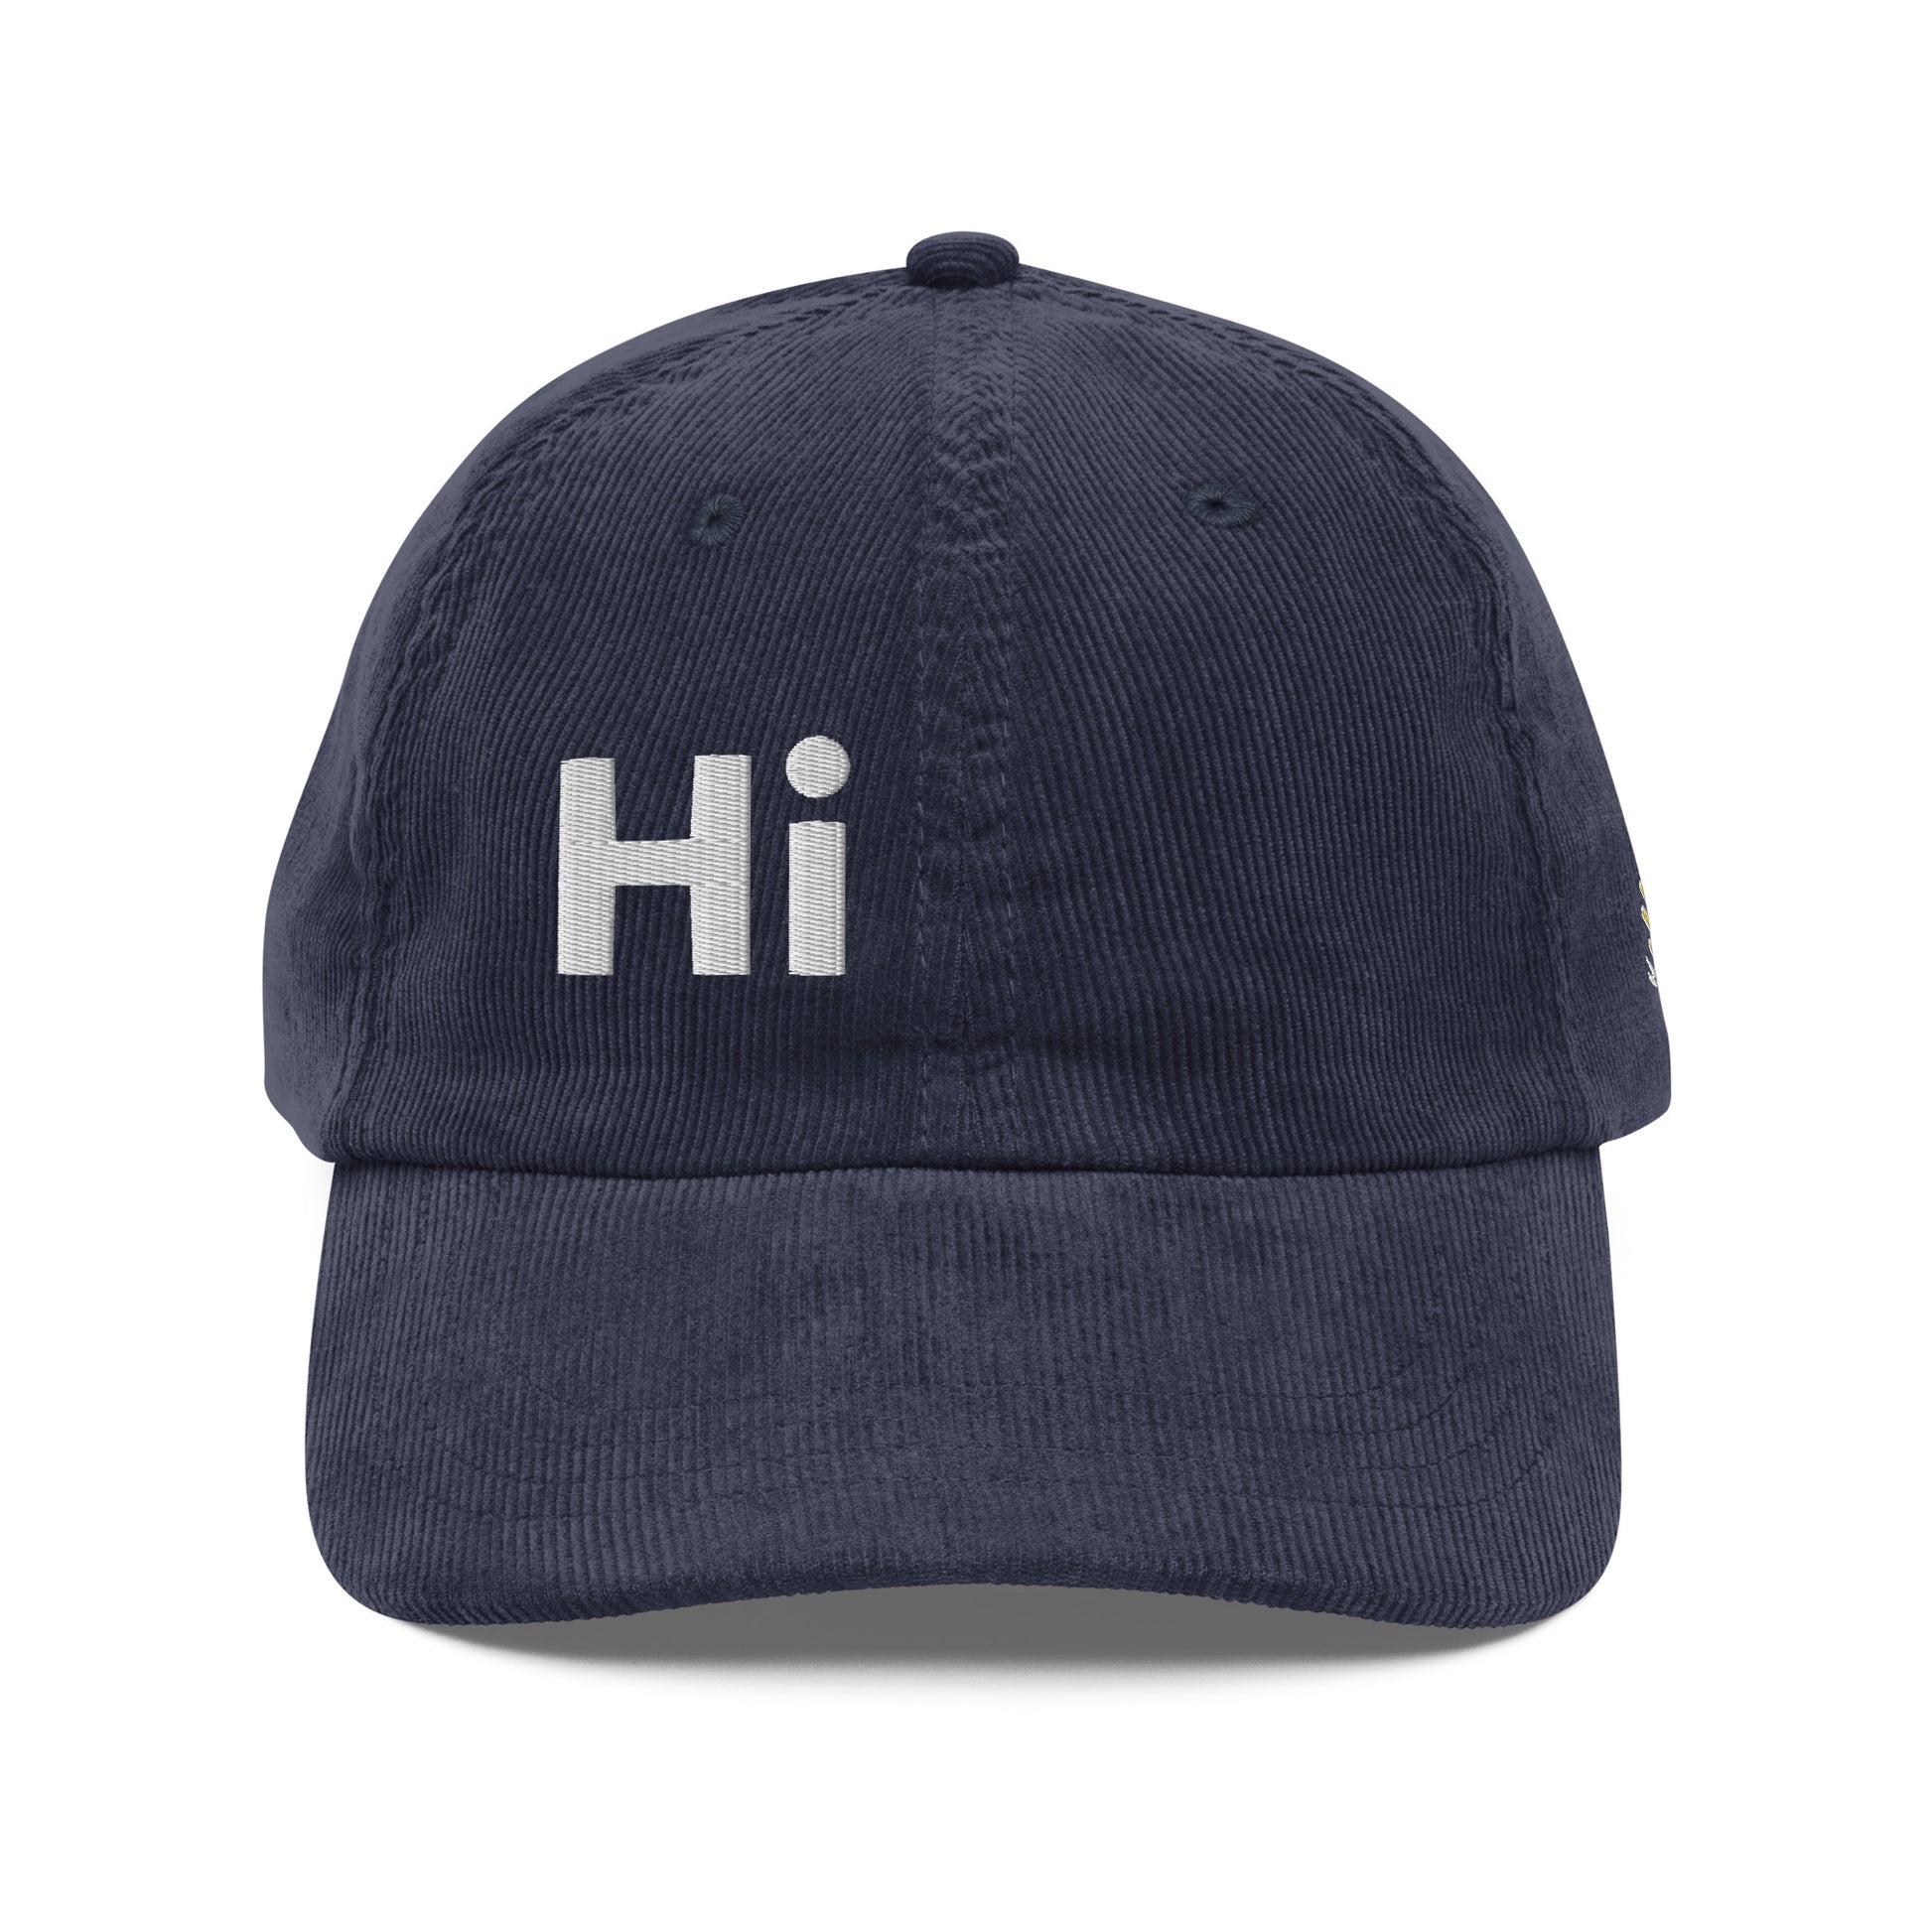 Hi Shalom Hebrew Corduroy Hat by Happy interactions in Navy